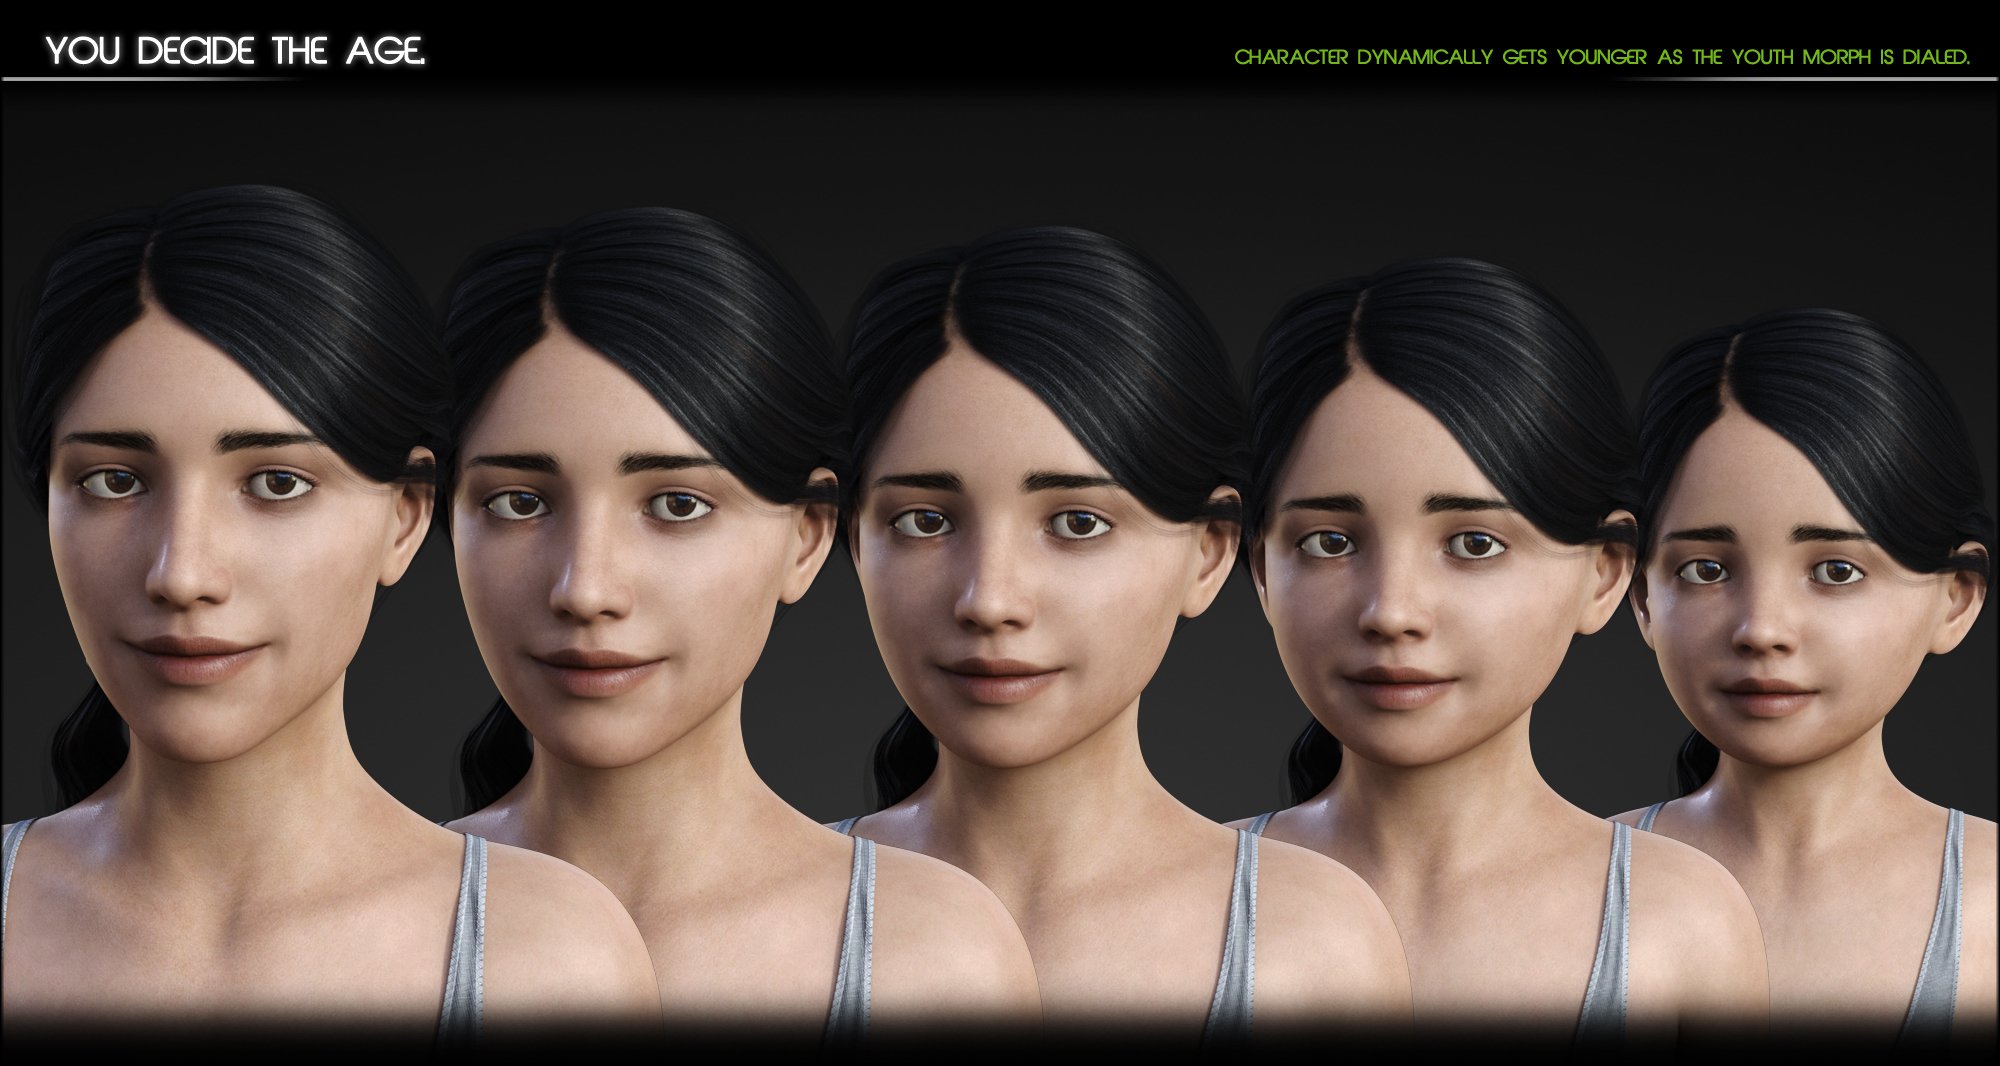 Growing Up for Genesis 8 Female(s) by: Zev0, 3D Models by Daz 3D